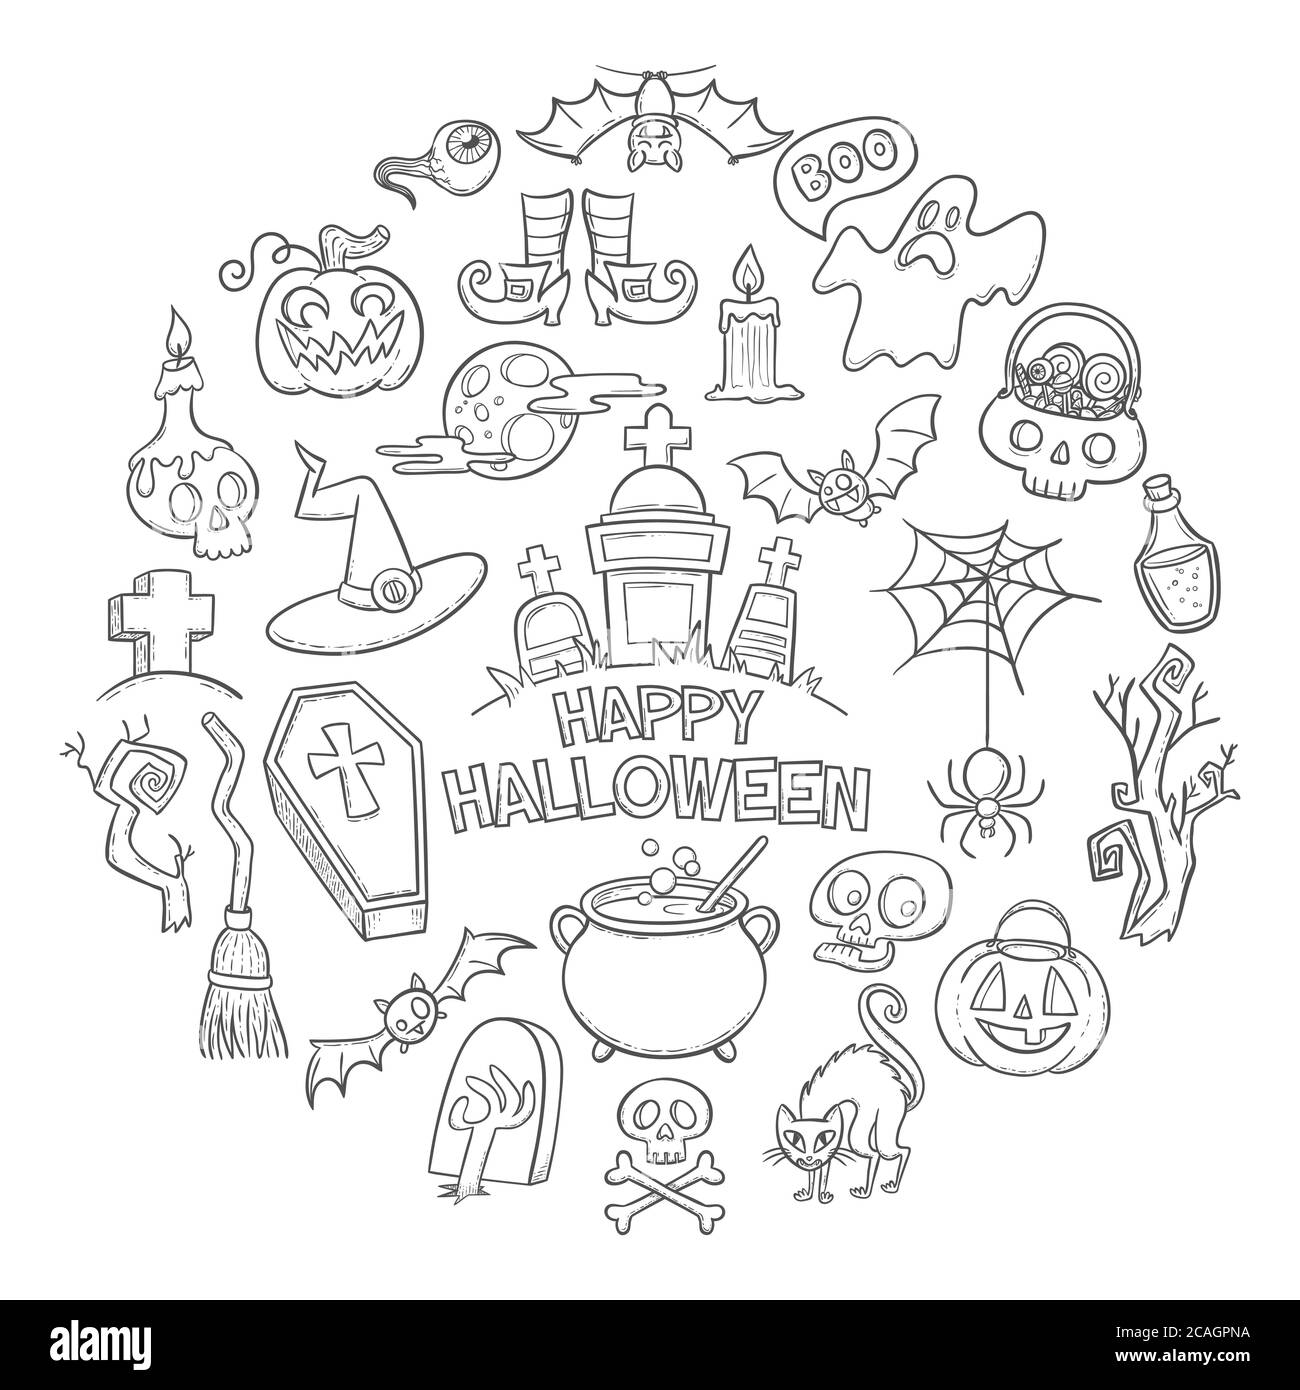 Halloween doodle elements collection. Cute background with hand drawn doodle elements of Halloween celebration. Vector illustration isolated on white Stock Vector